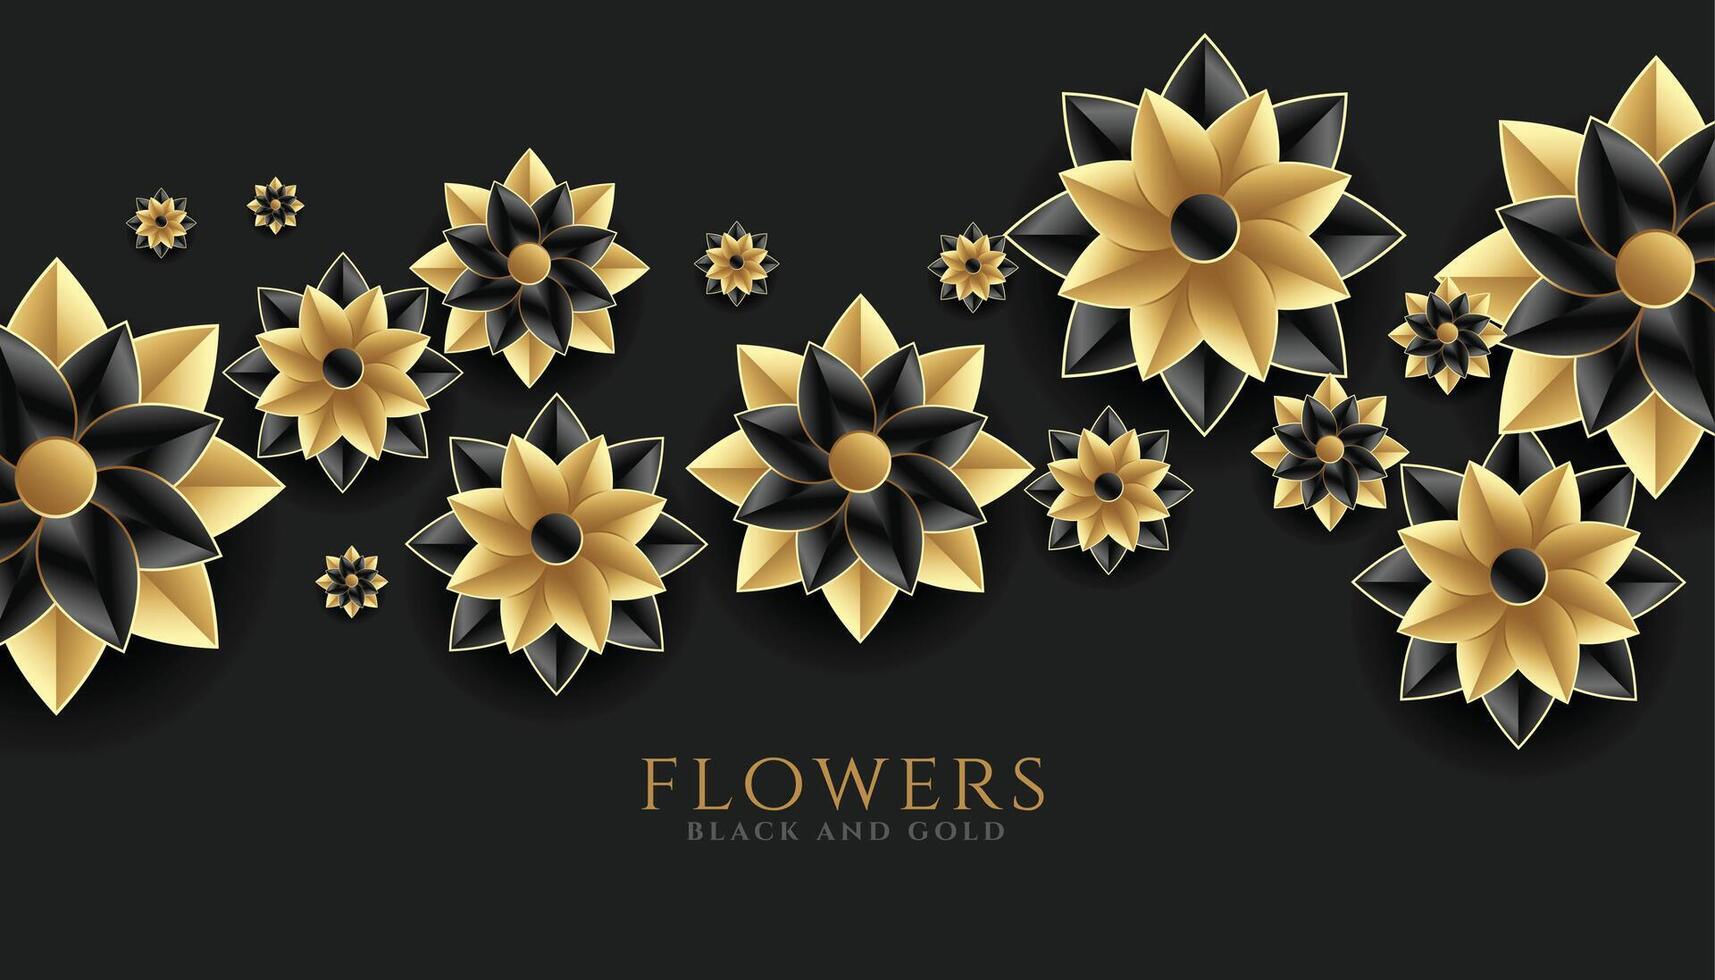 golden and black flowers decoration lovely background vector